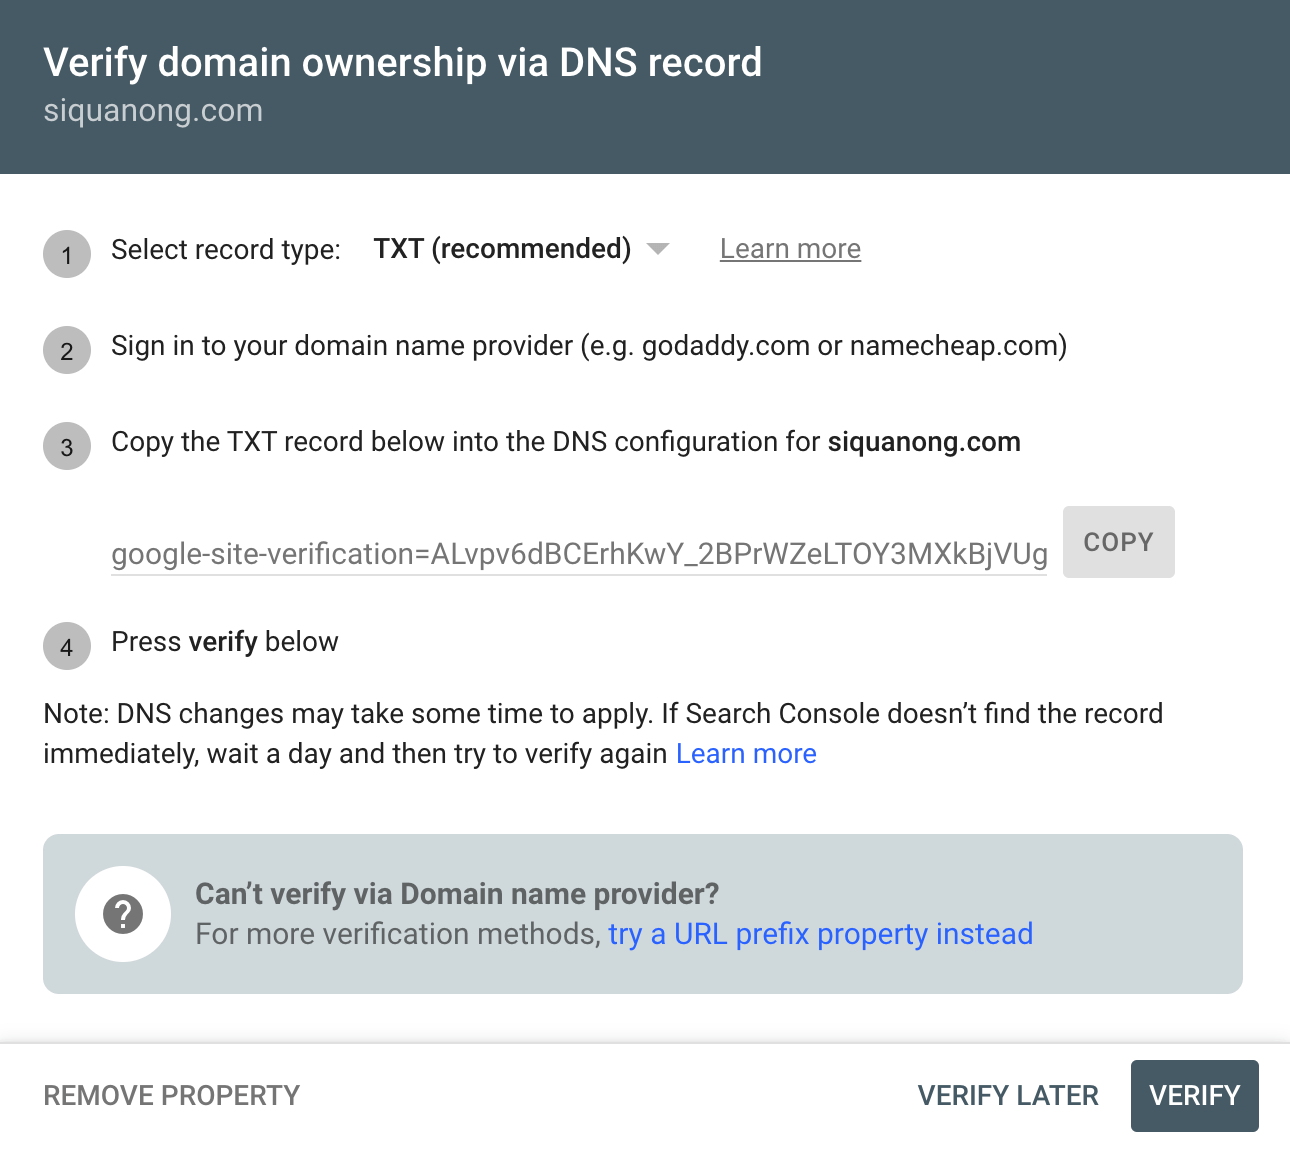 Verifying domain ownership via TXT in Google Search Console